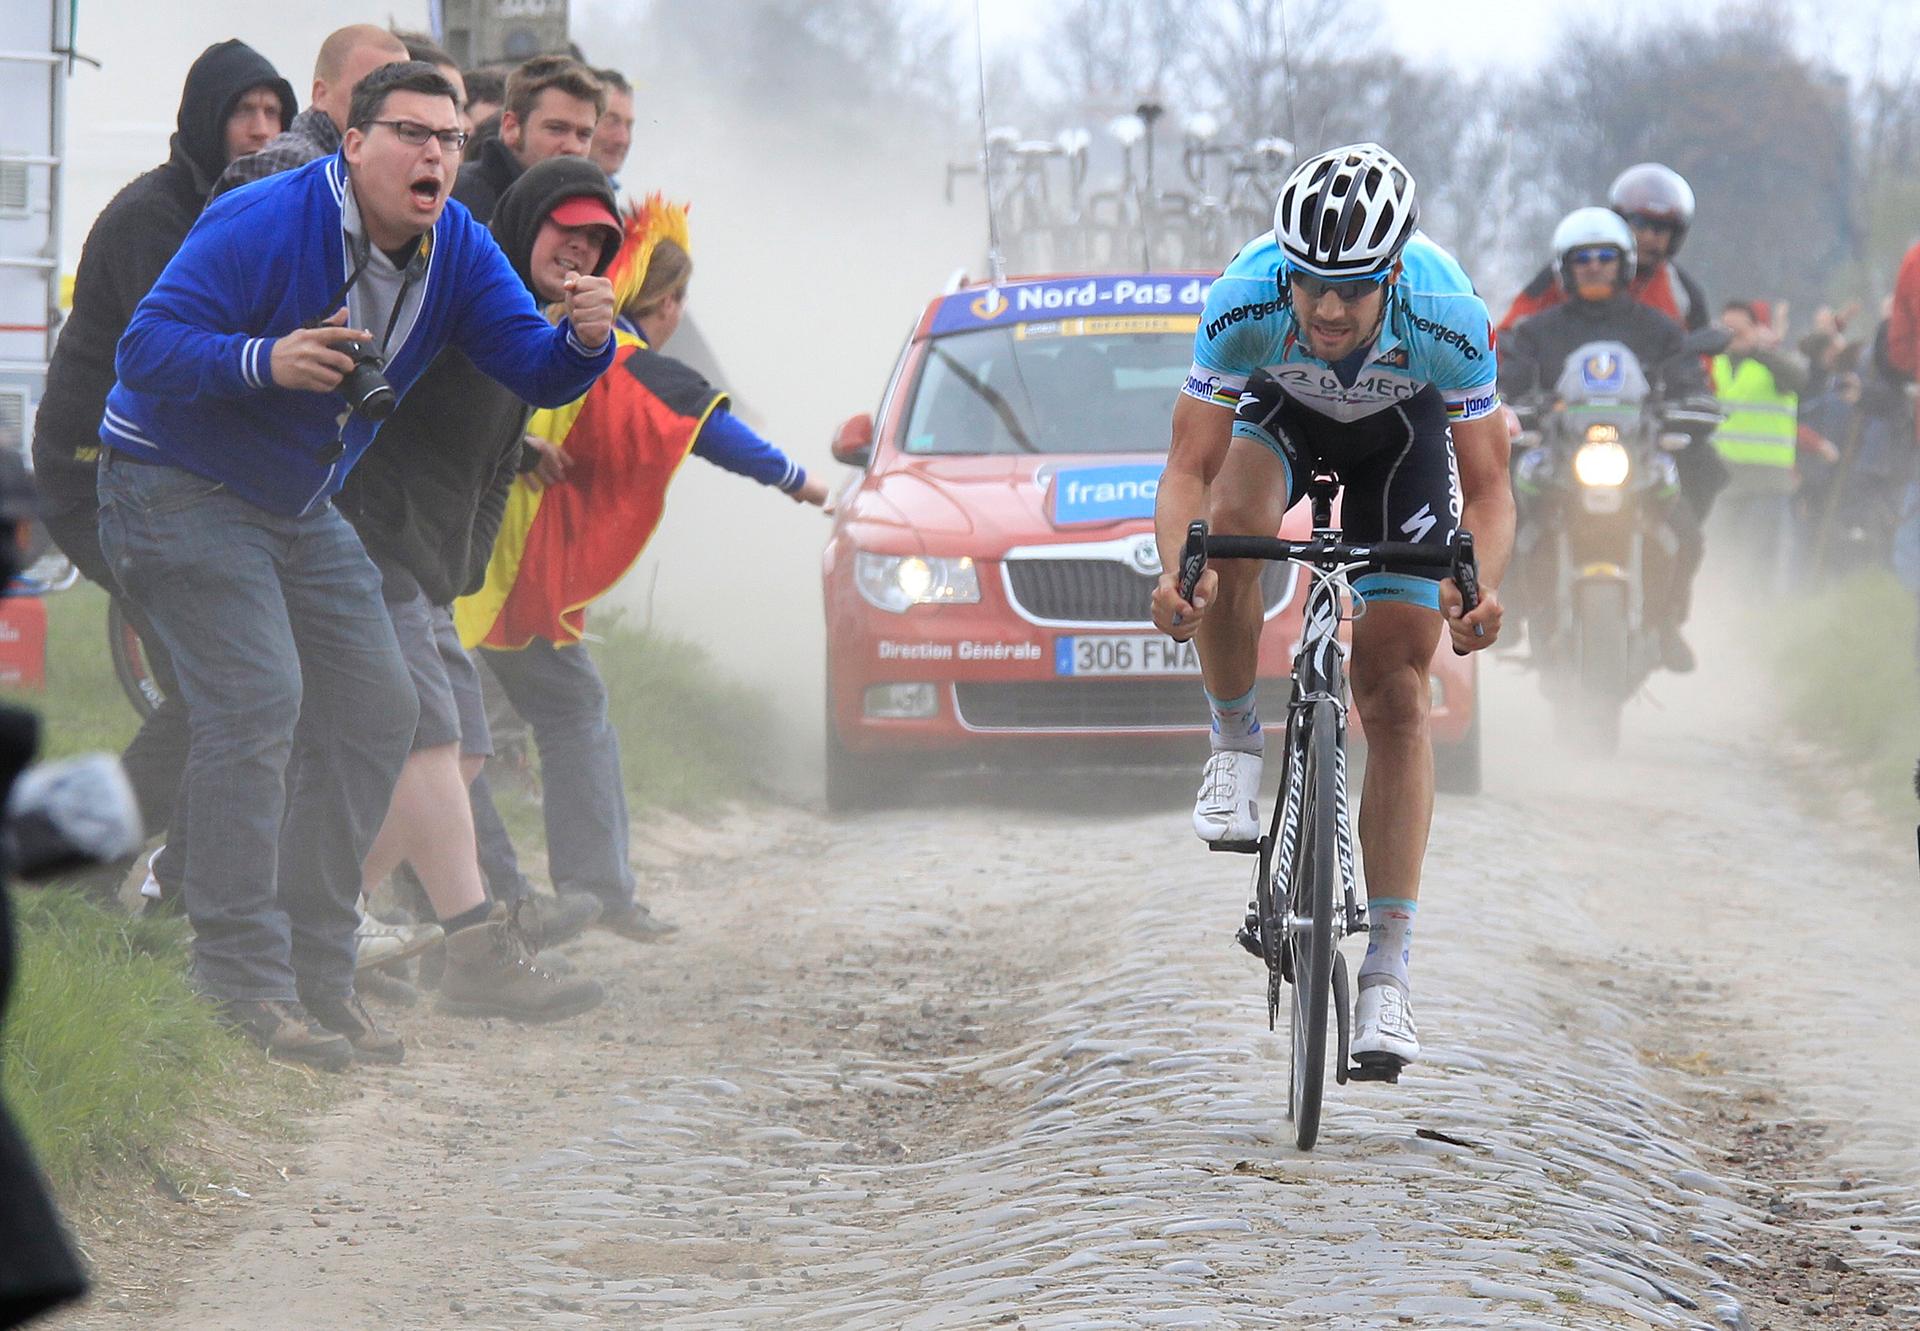 Belgium's Tom Boonen is cheered by supporters as he rides on a cobblestoned section of the Paris-Roubaix cycling classic in northern France, April 8, 2012.